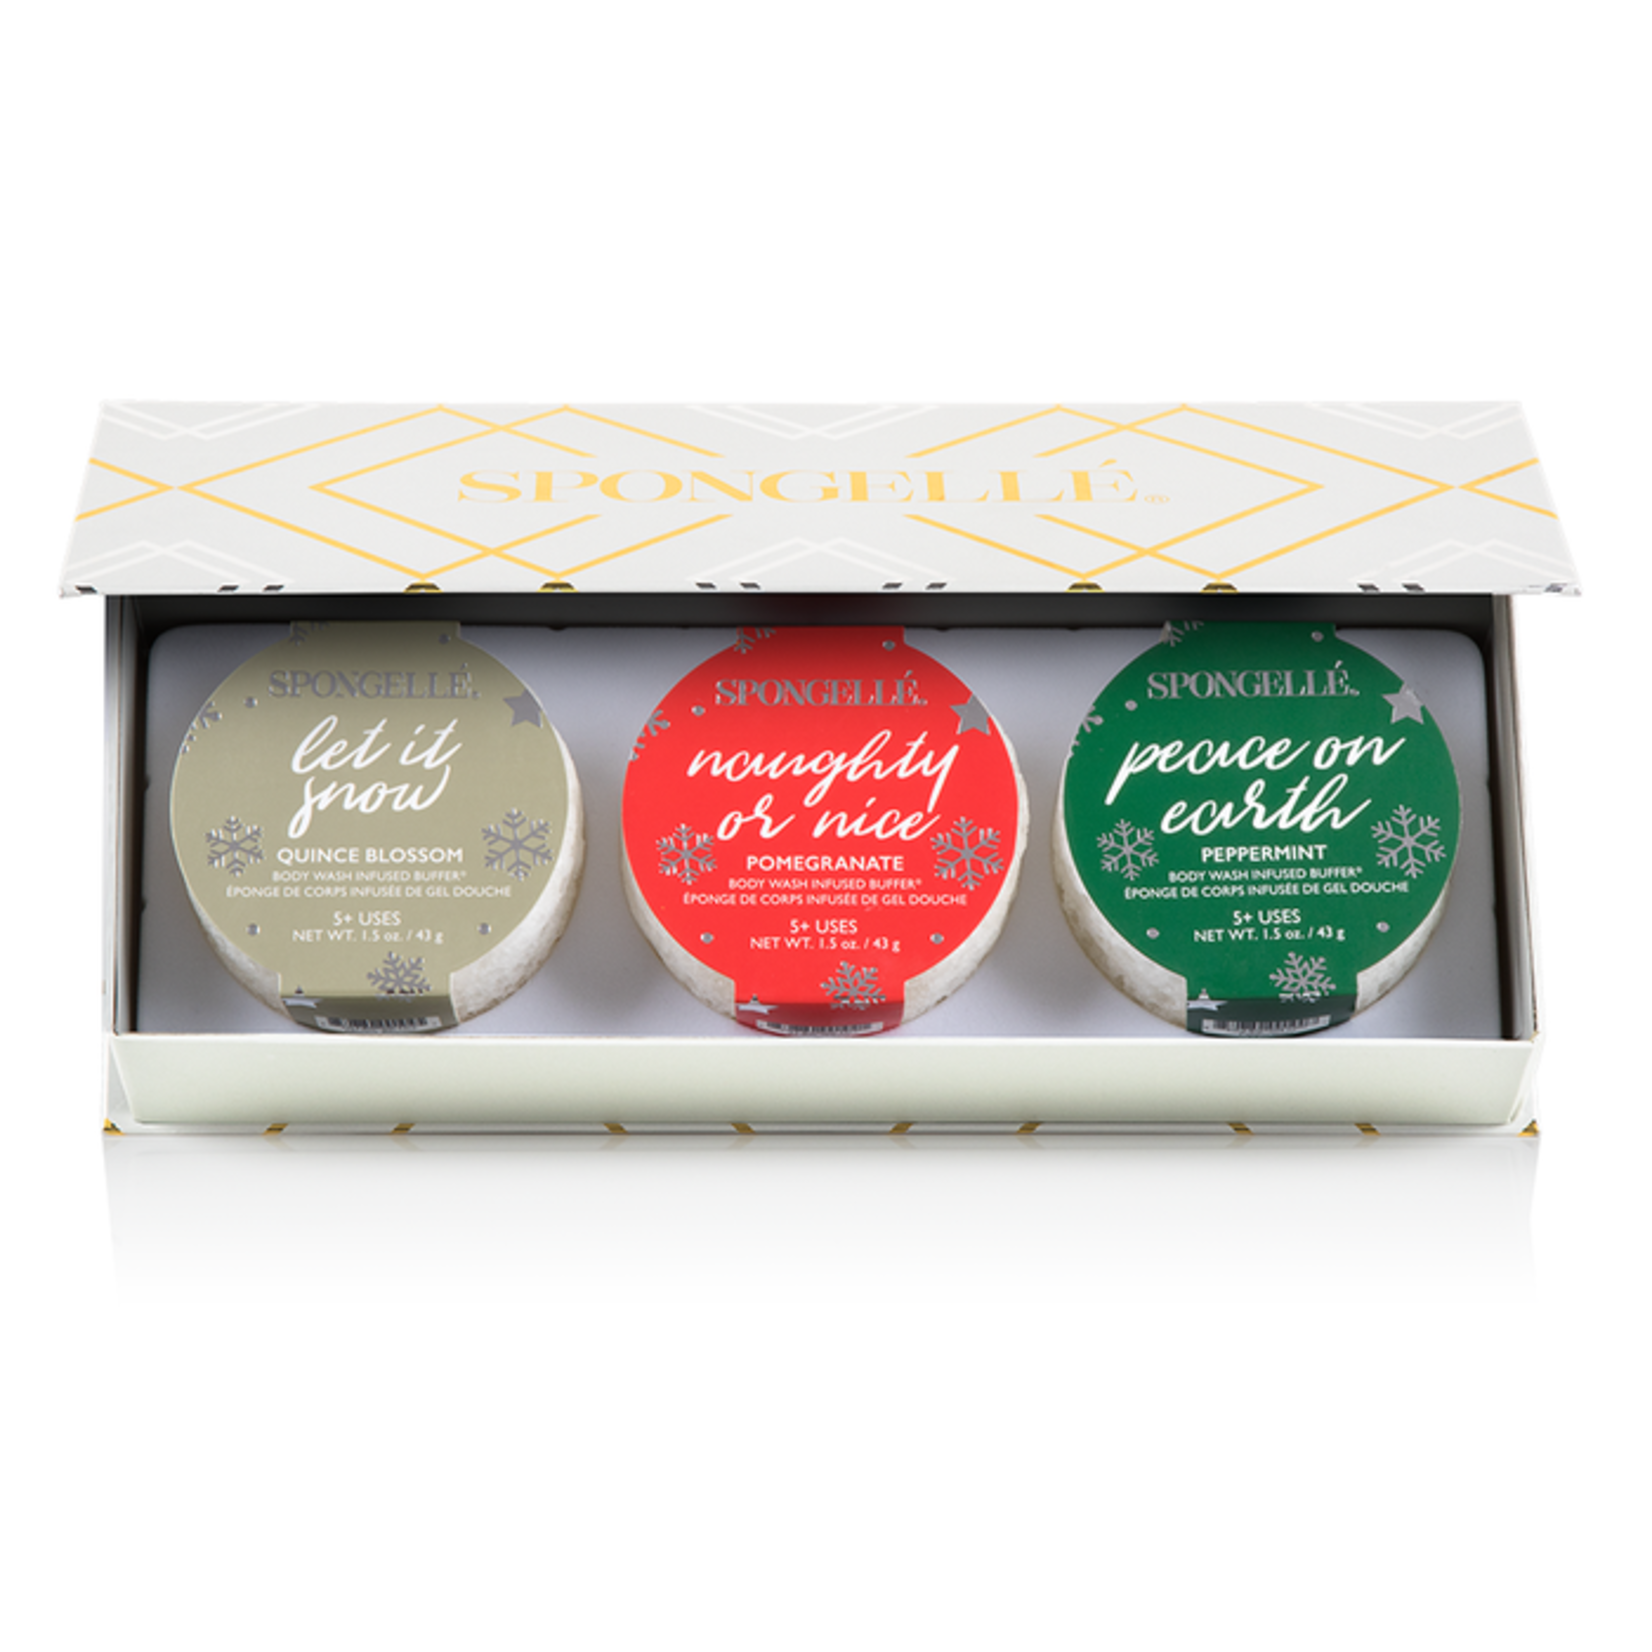 The Merry & Bright Gift Set